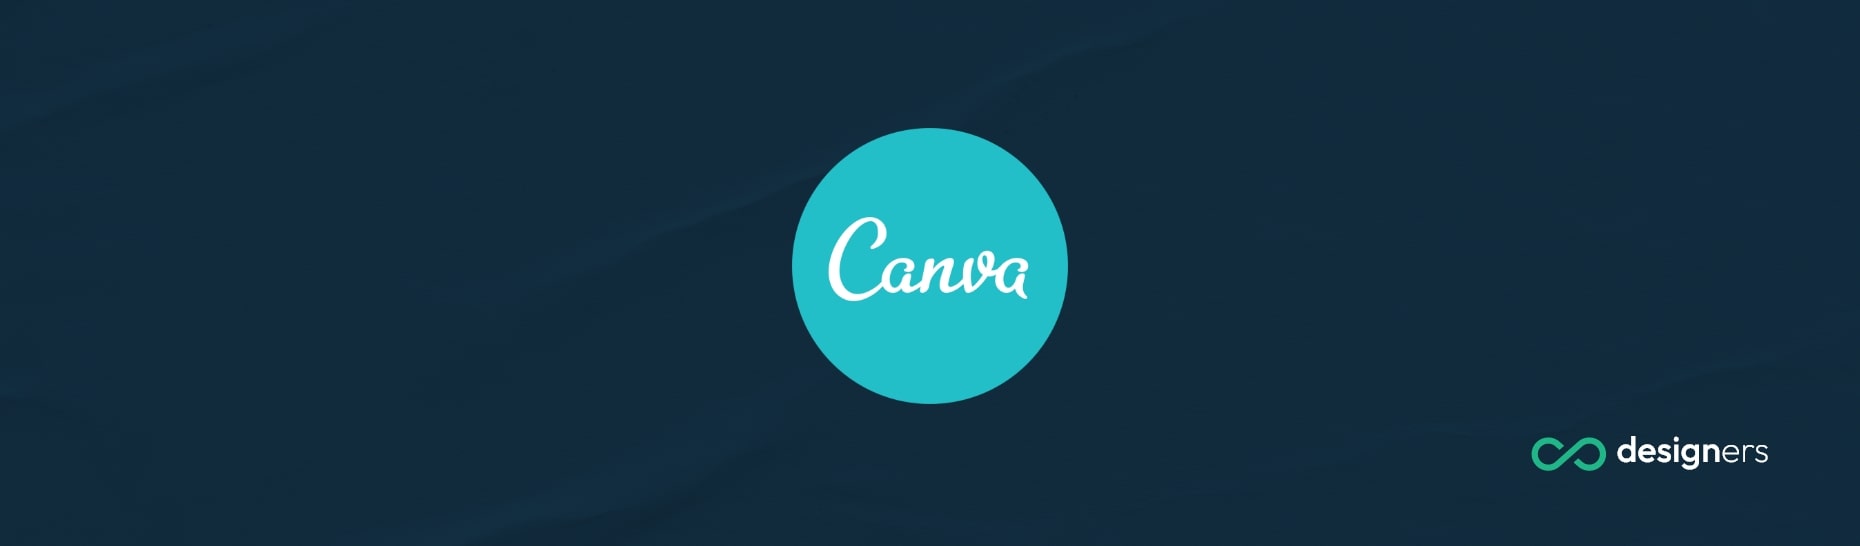 How Do I Pixelate an Image in Canva? 